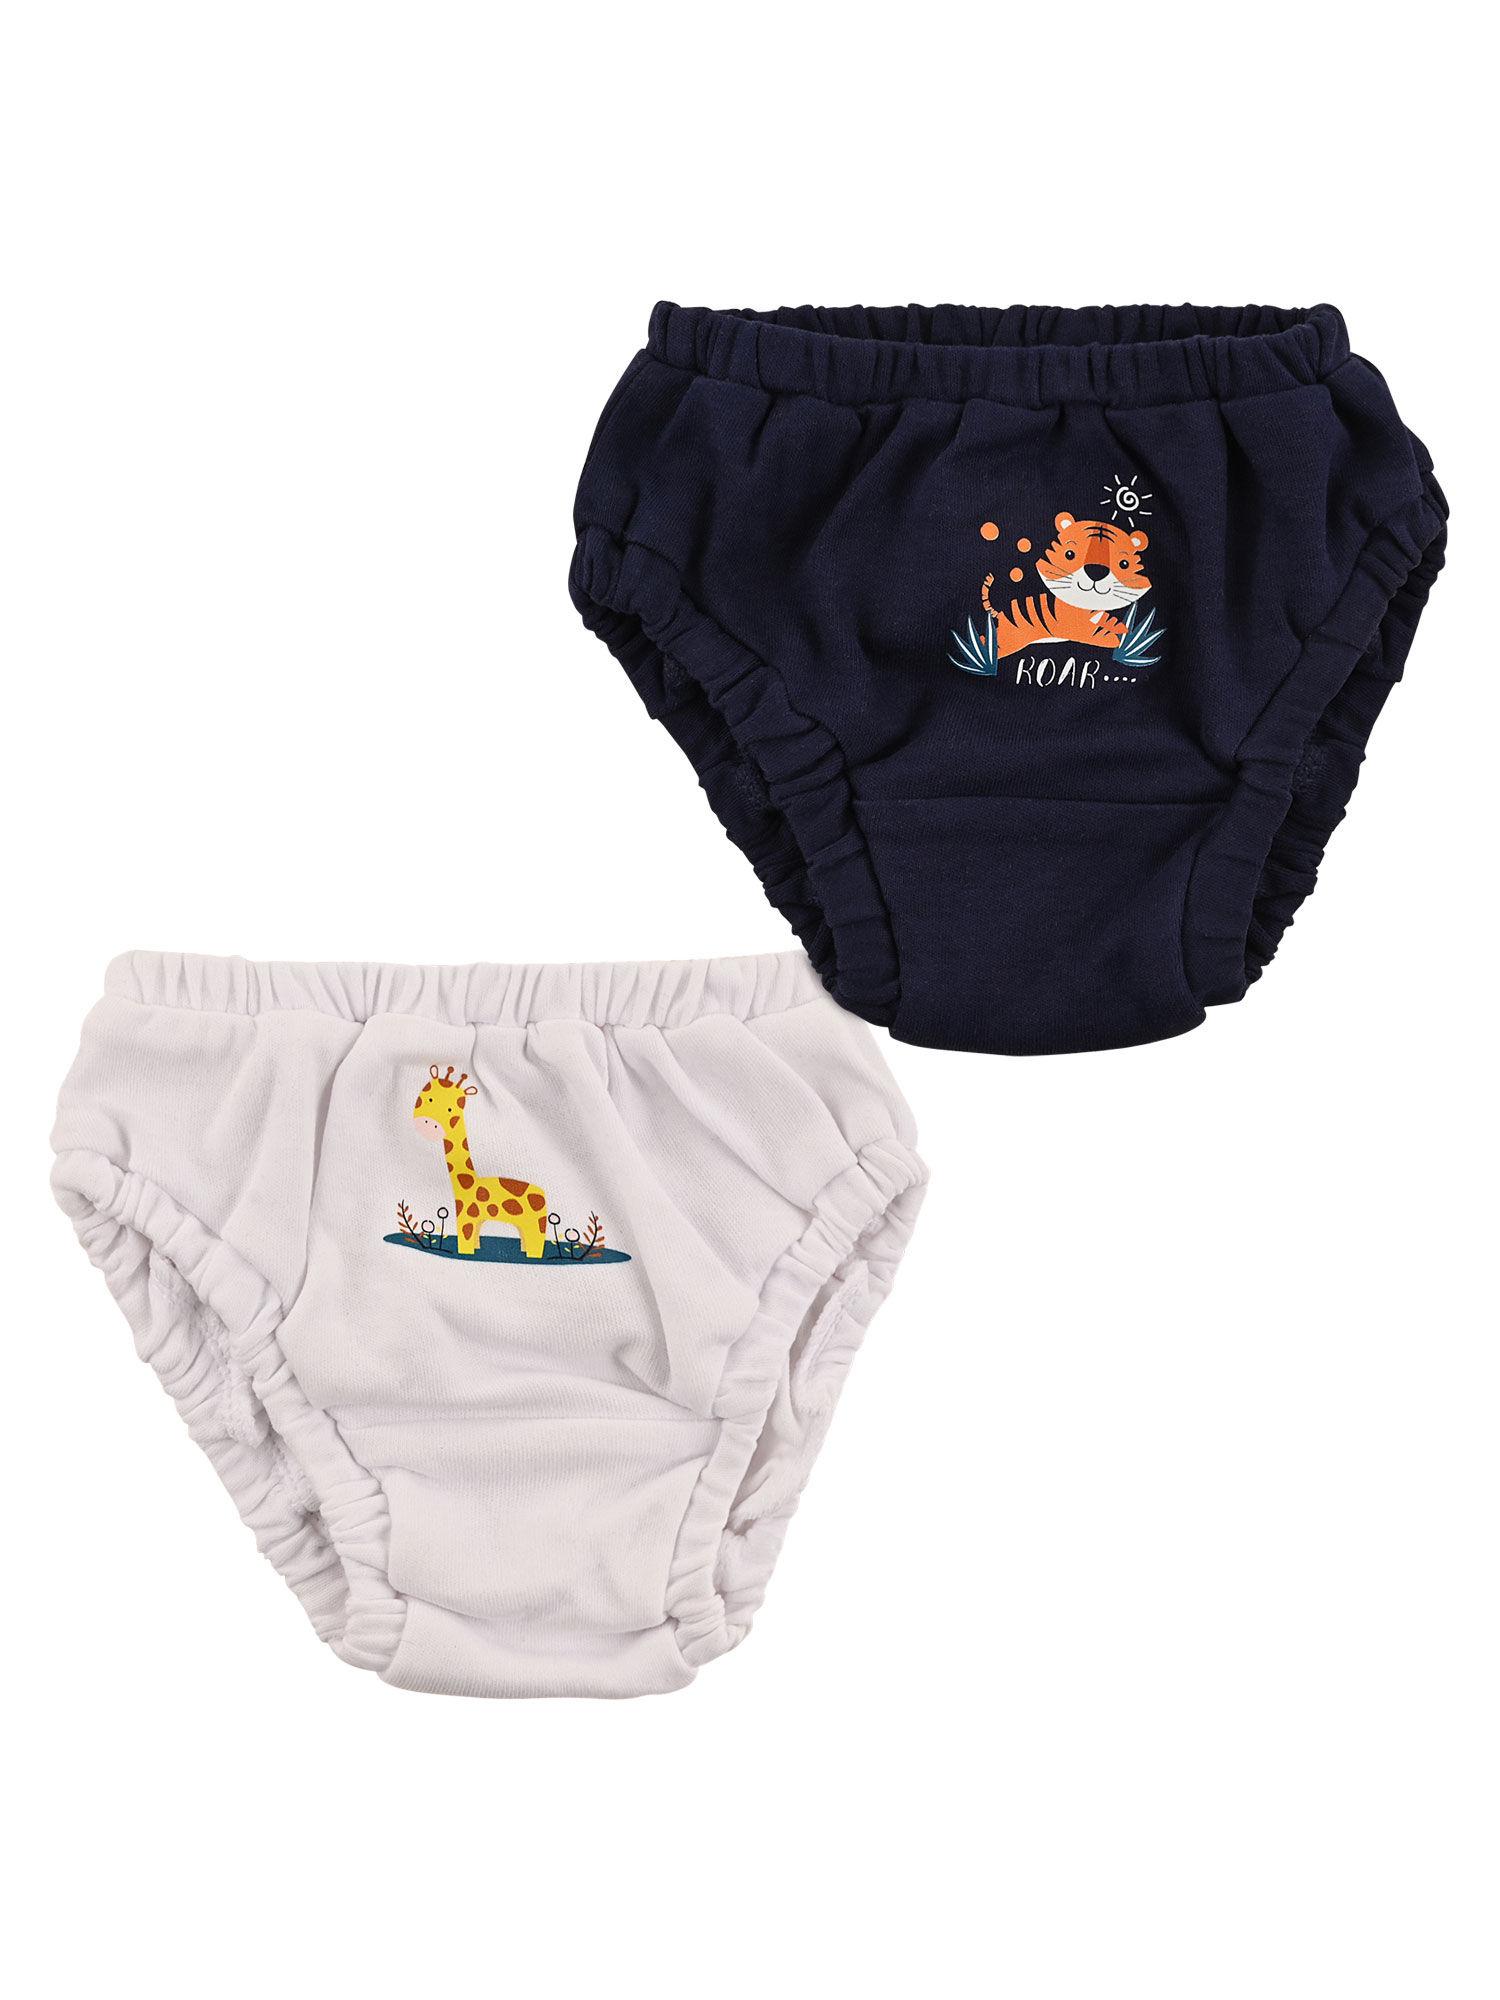 baby-boys-printed-bloomer-brief-underwear-white-and-black-(pack-of-2)